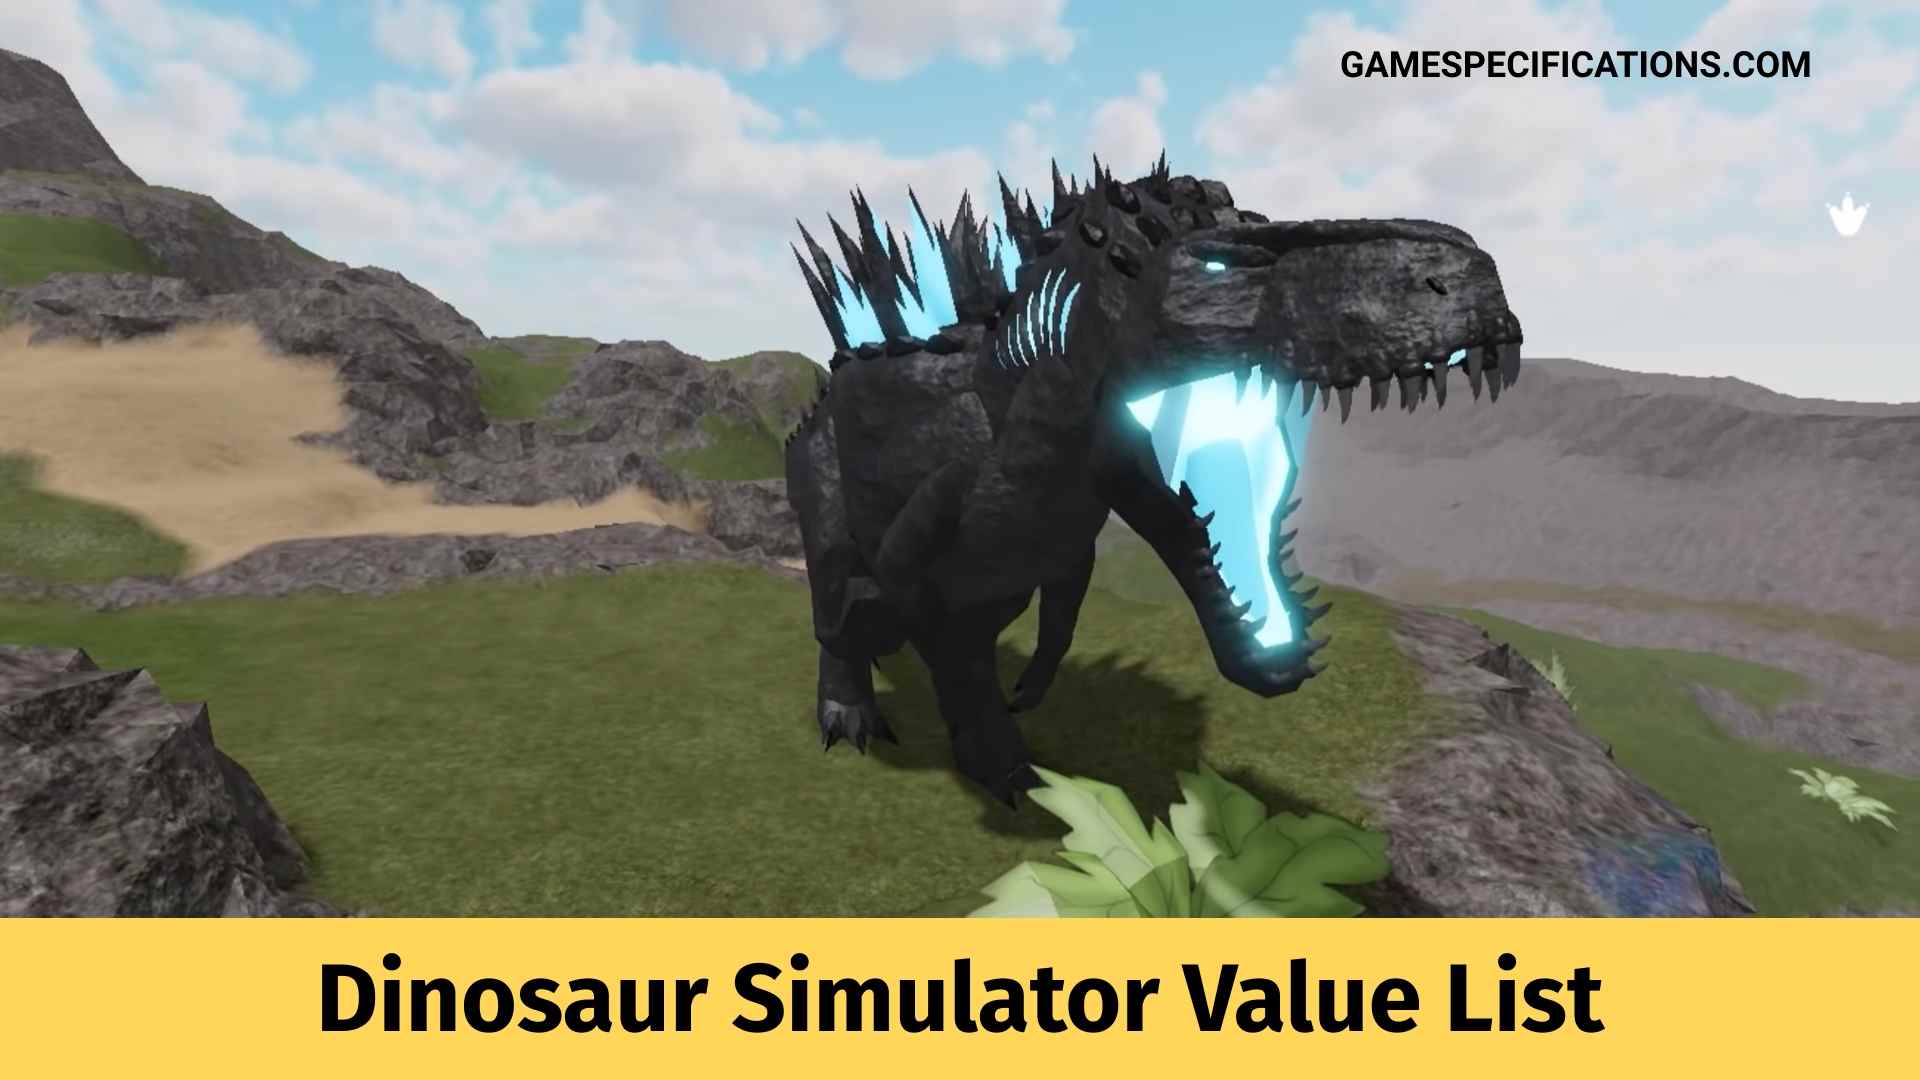 Roblox Dinosaur Simulator Value List For All Tiers 2021 Game Specifications - roblox ds value list